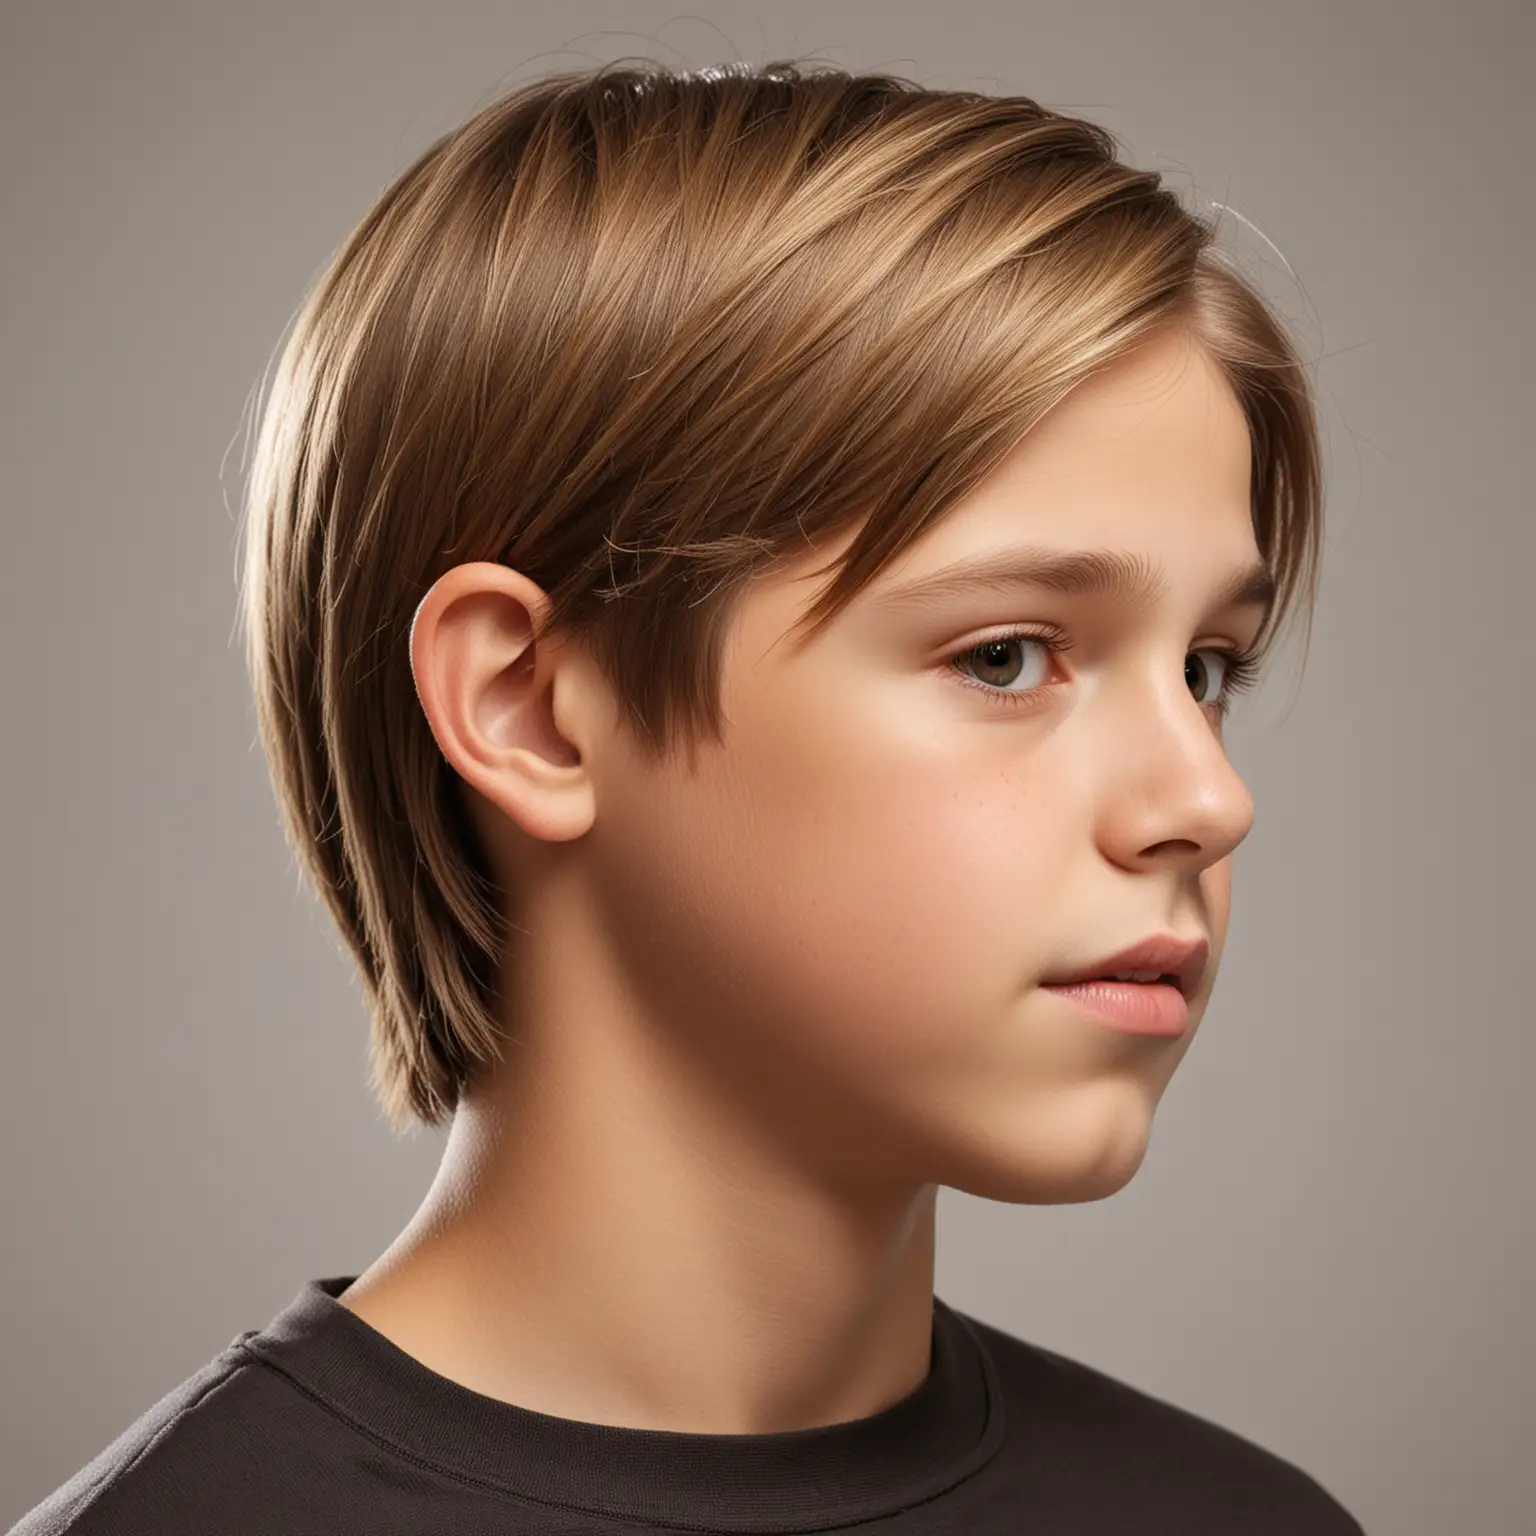 Portrait of a ThirteenYearOld Boy with Neatly Combed ShoulderLength Light Brown Hair